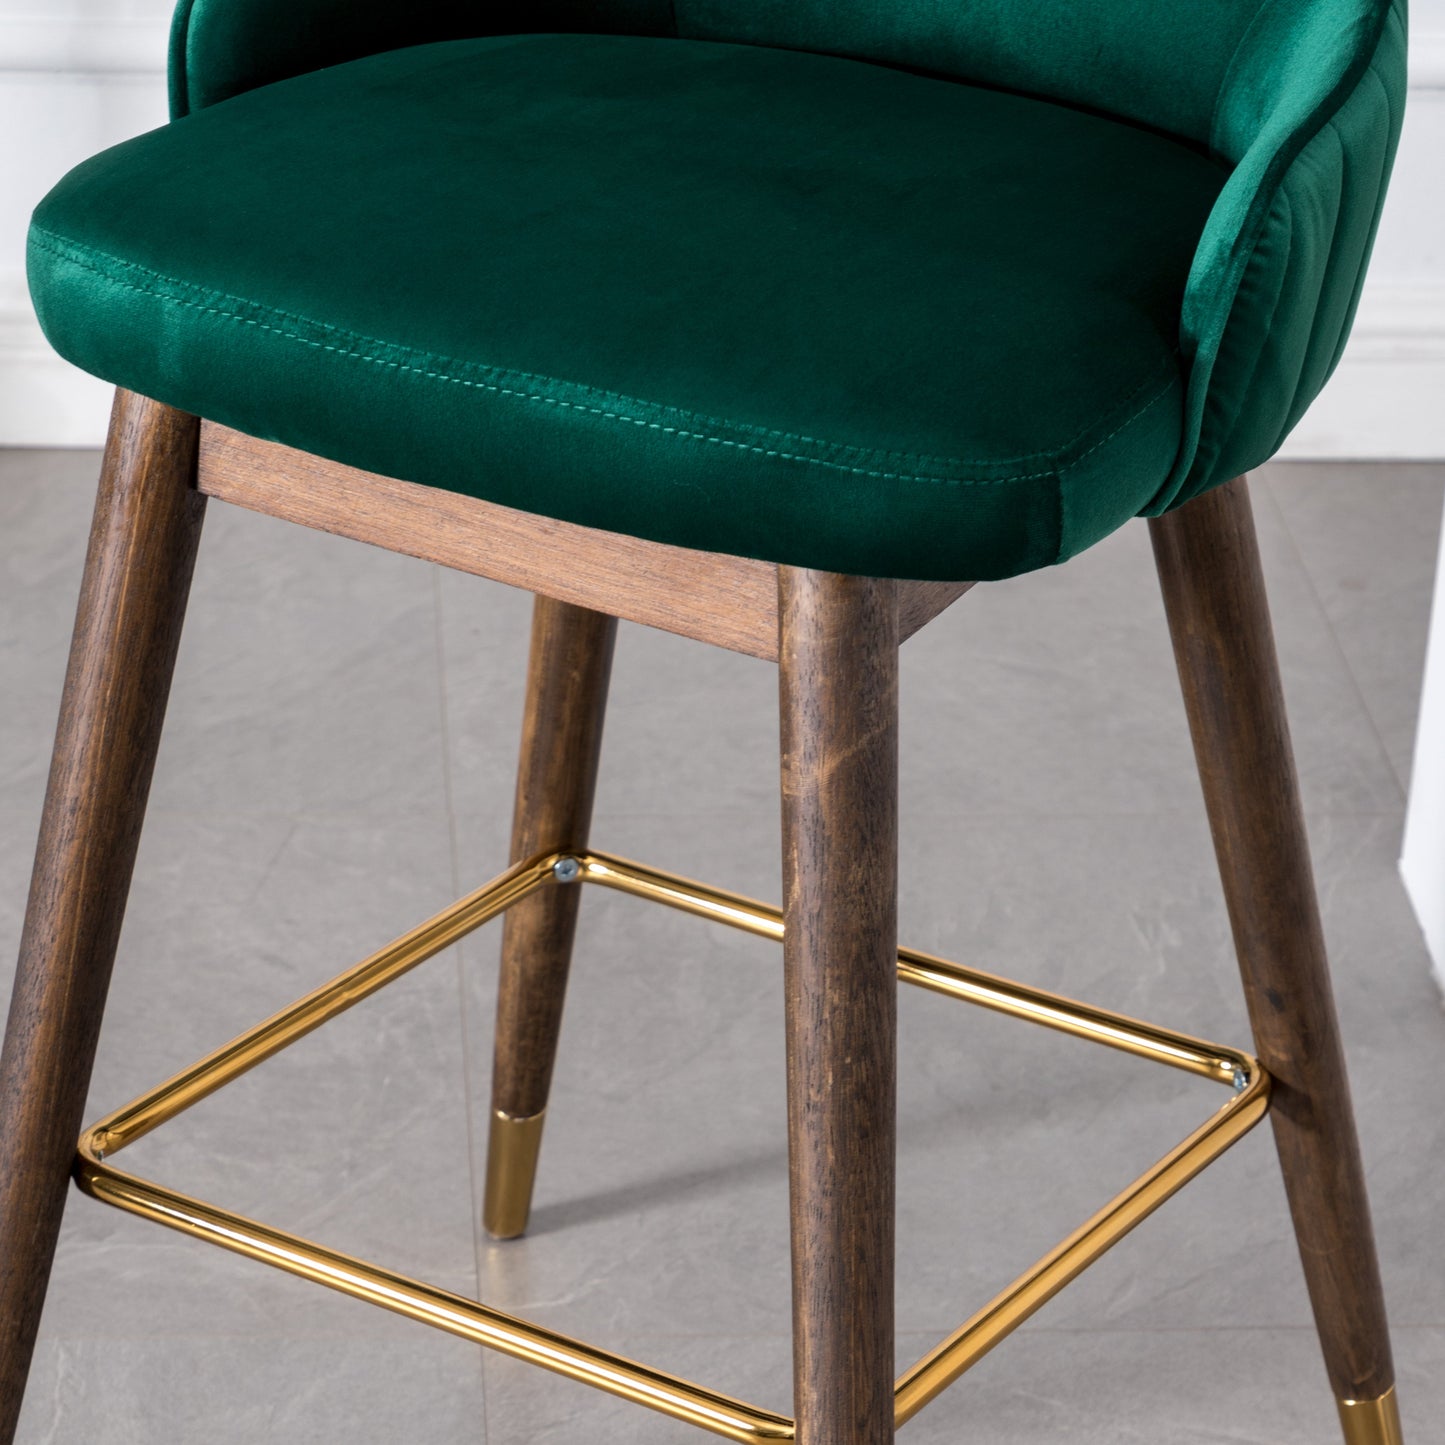 Leland Fabric Upholstered Counter Height Wingback Stools, Set of 2, Green